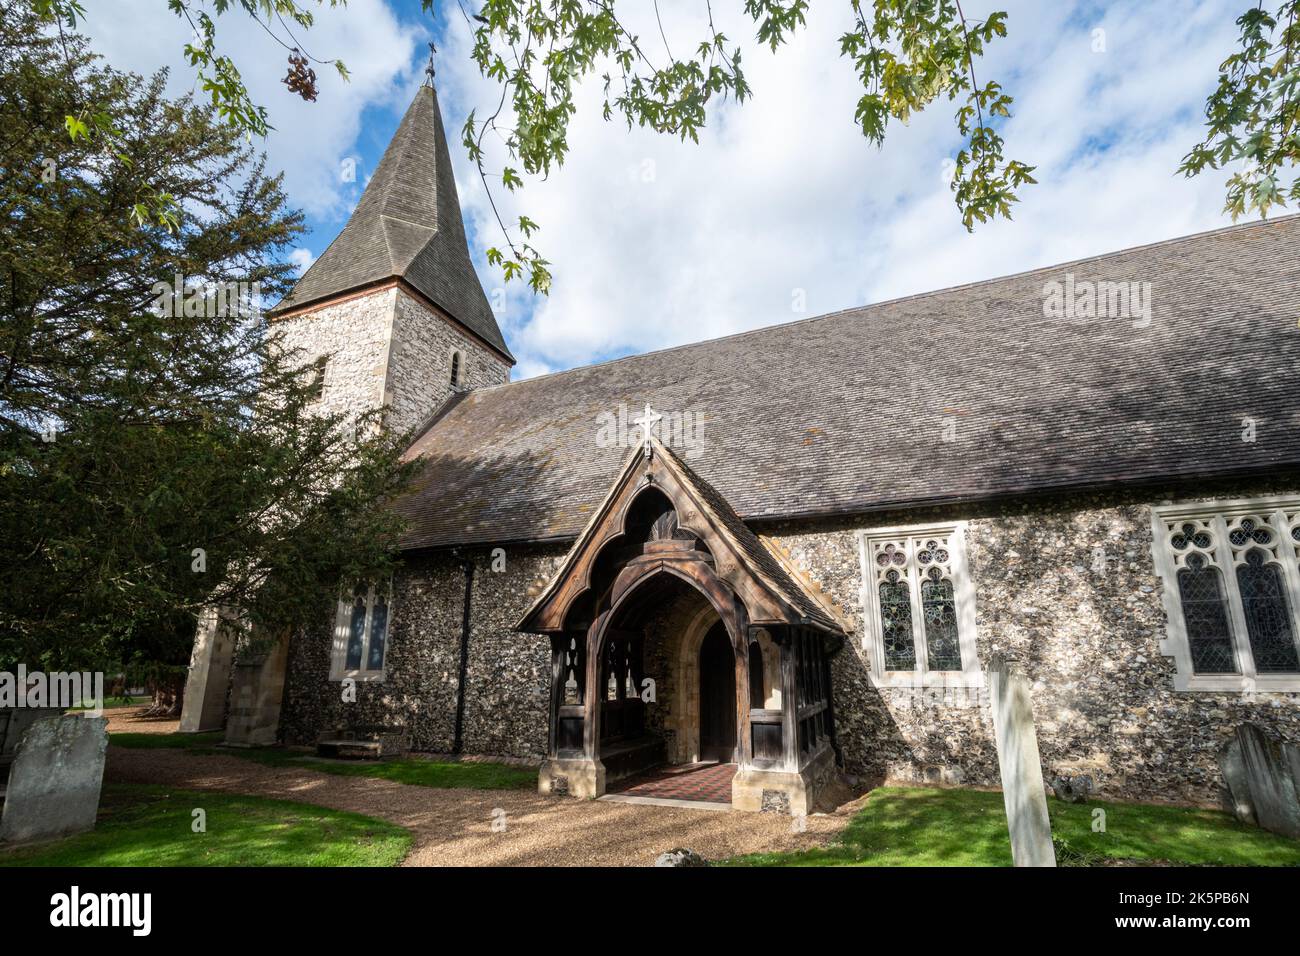 The Church of St Peter and St Andrew in Old Windsor village, parish church in Berkshire, England, UK Stock Photo